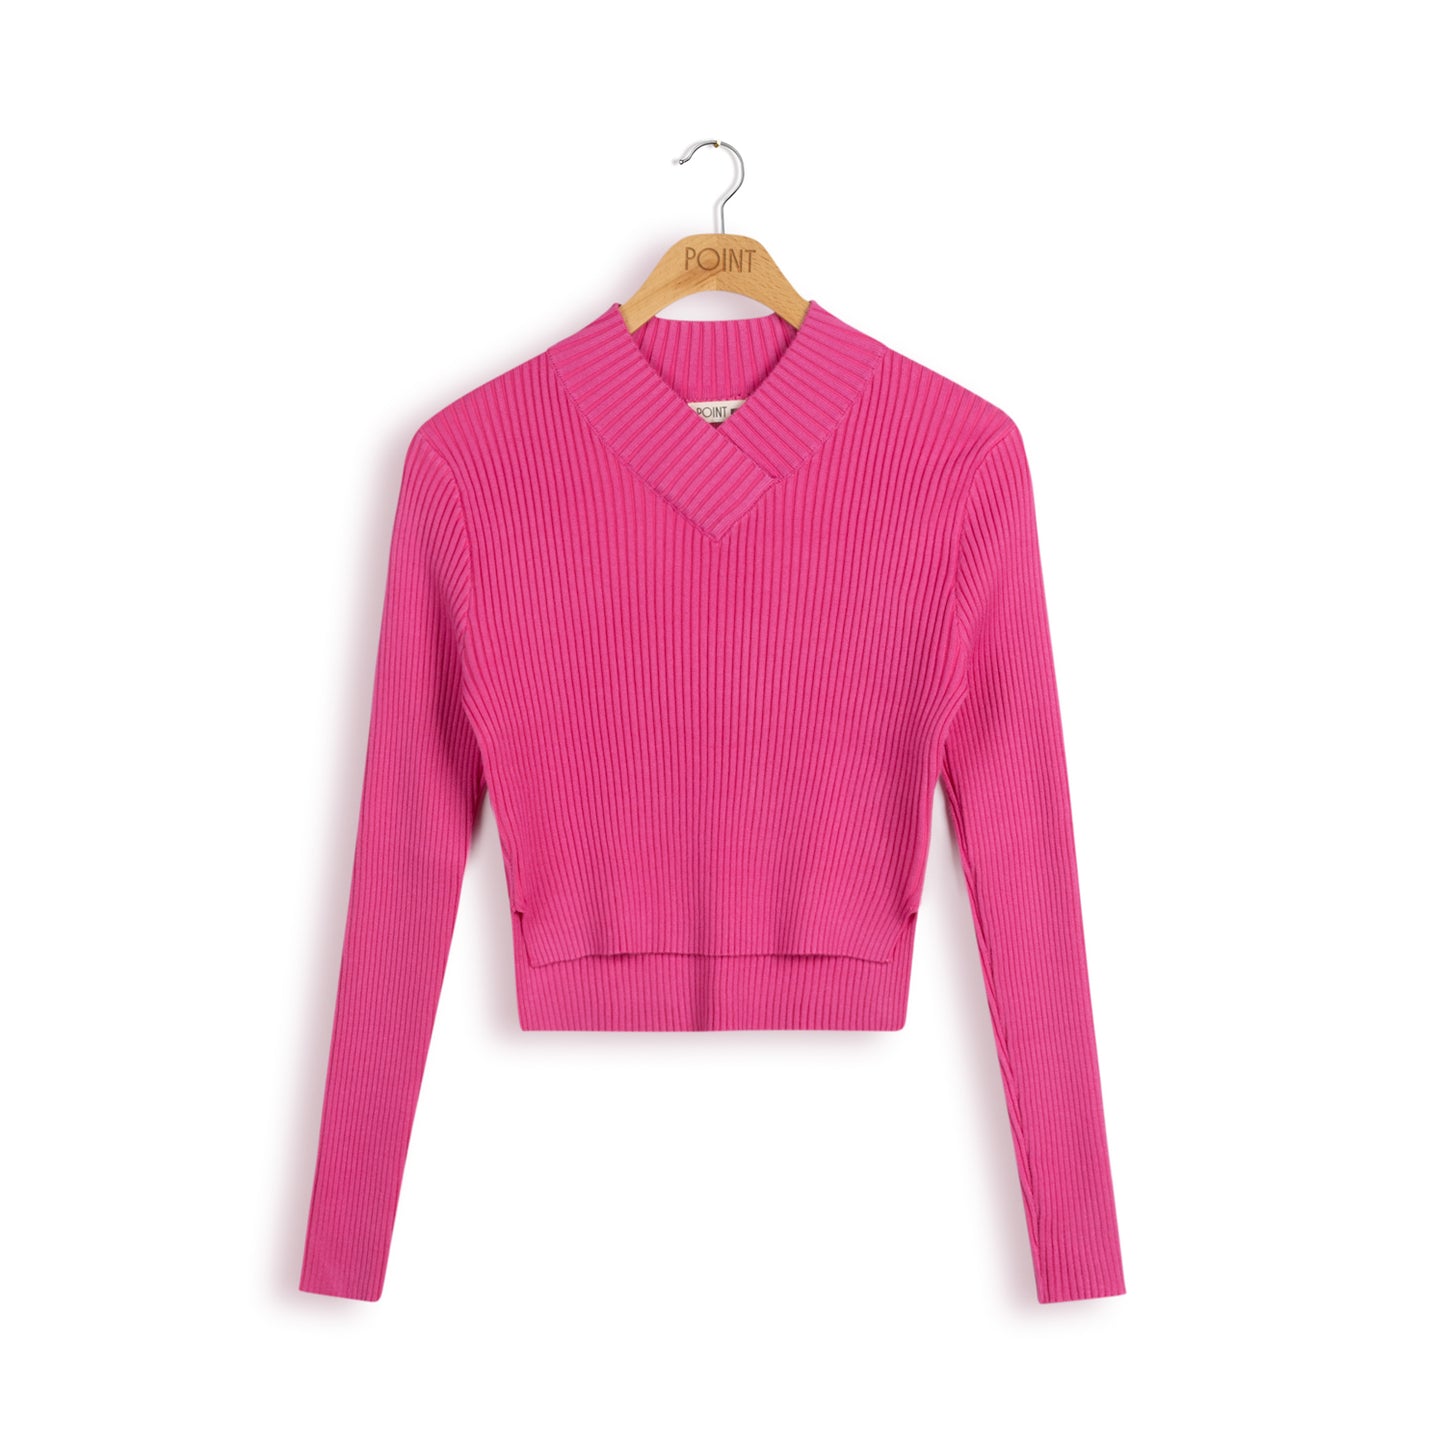 point vneck cropped sweater